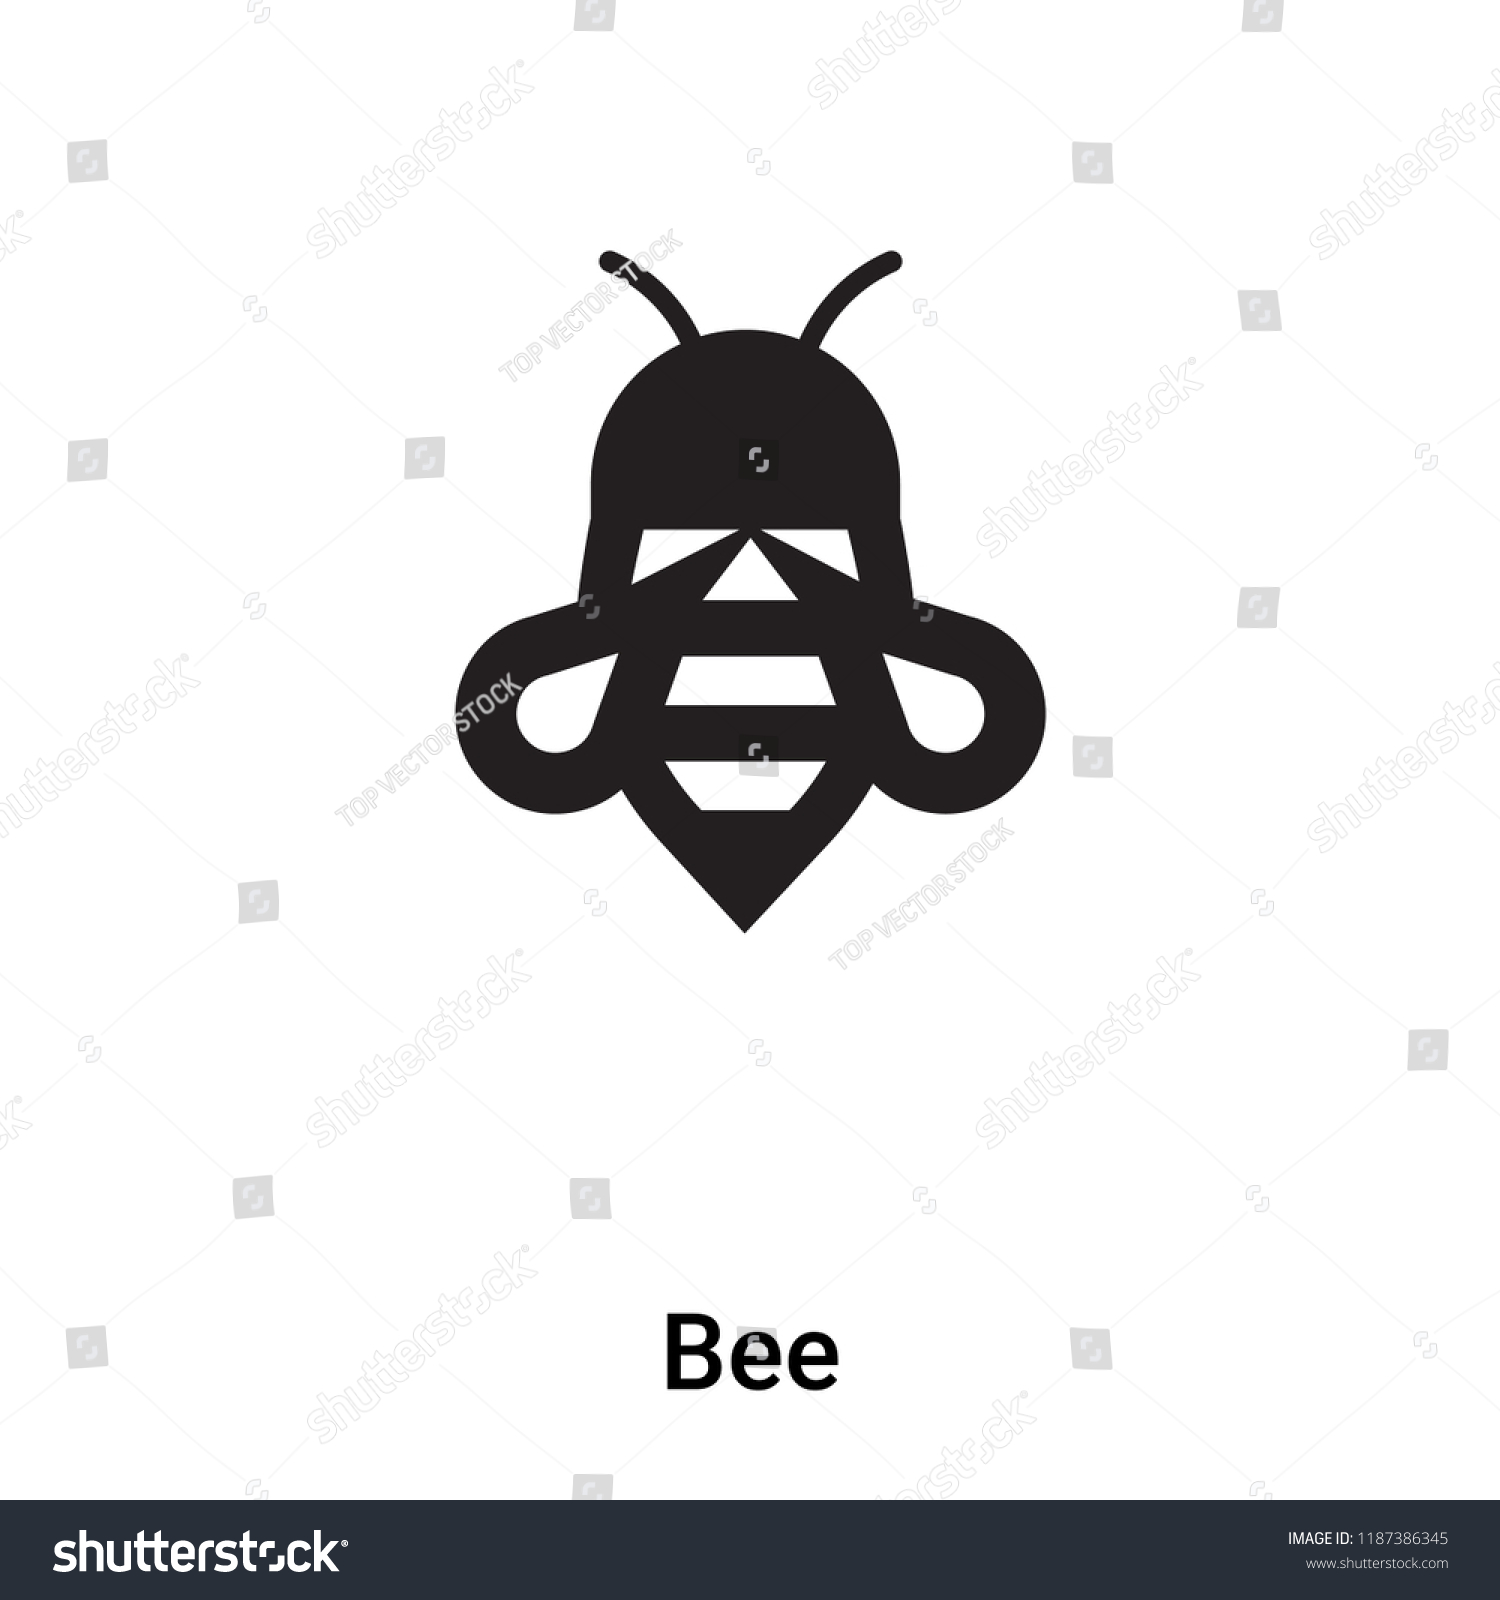 SVG of Bee icon vector isolated on white background, logo concept of Bee sign on transparent background, filled black symbol svg